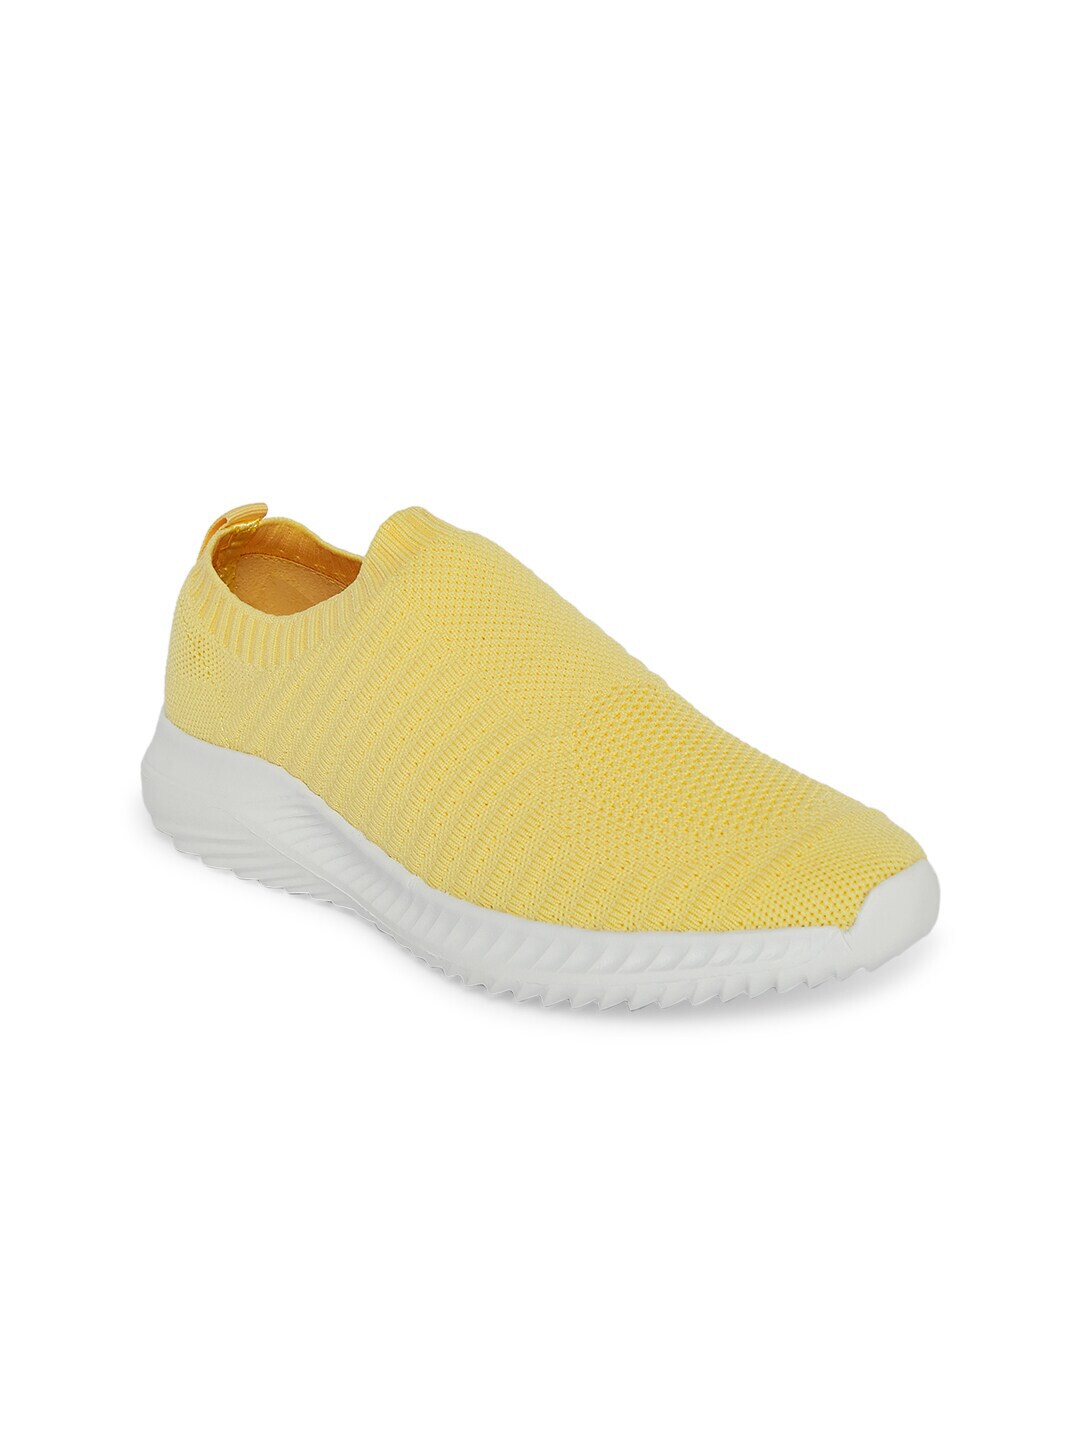 Forever Glam by Pantaloons Women Yellow Textile Running Non-Marking Shoes Price in India